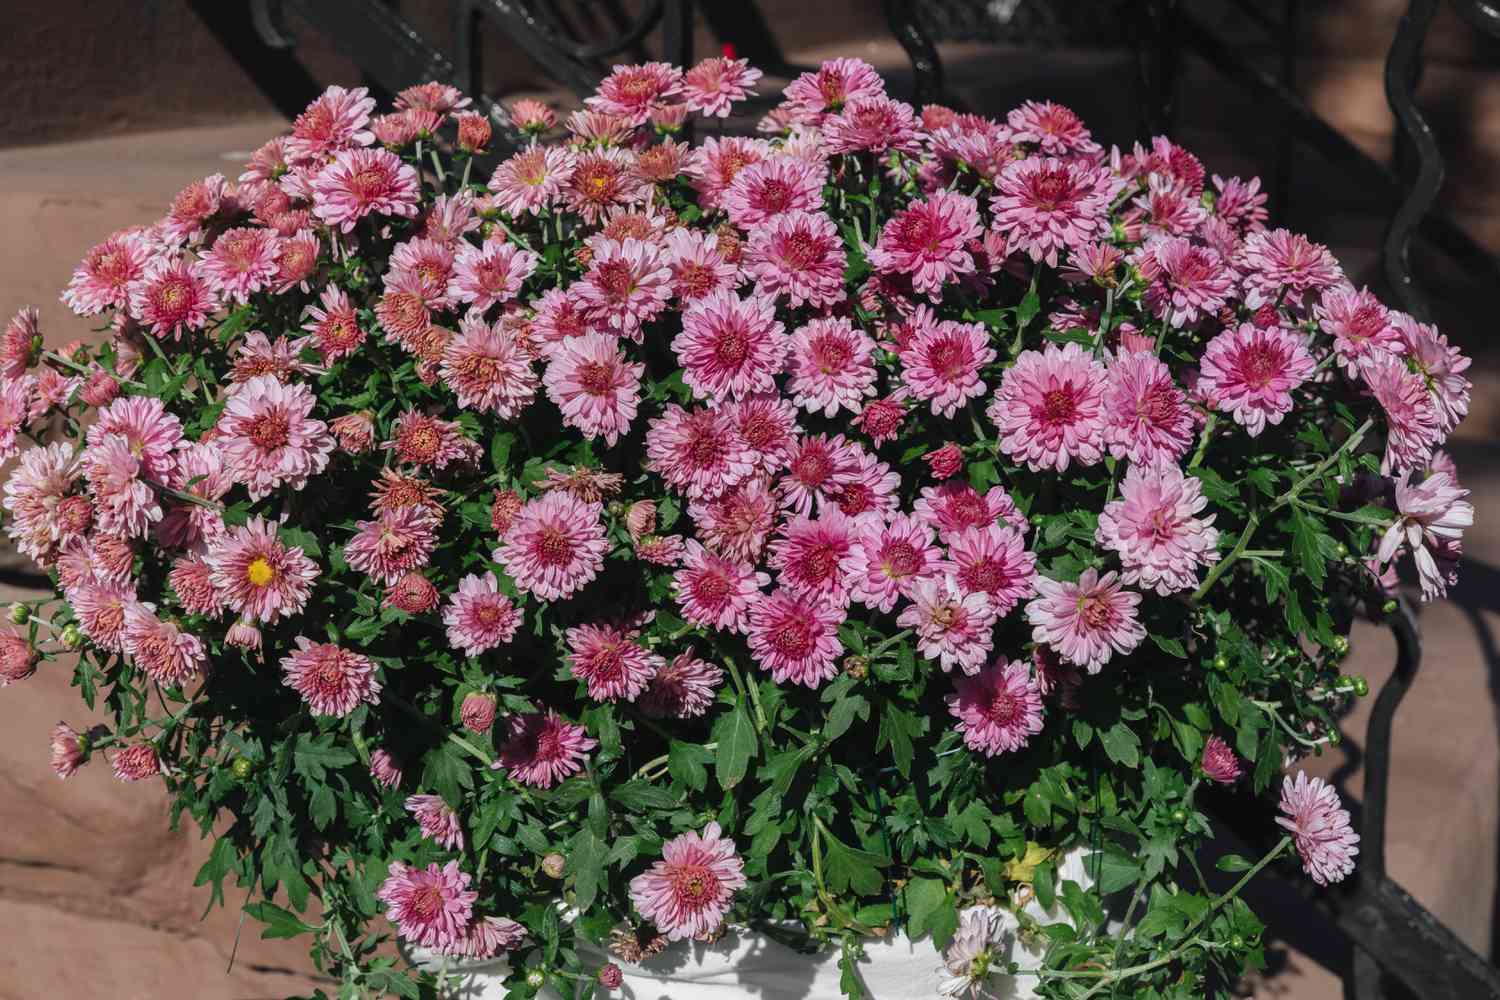 mums growing in a container